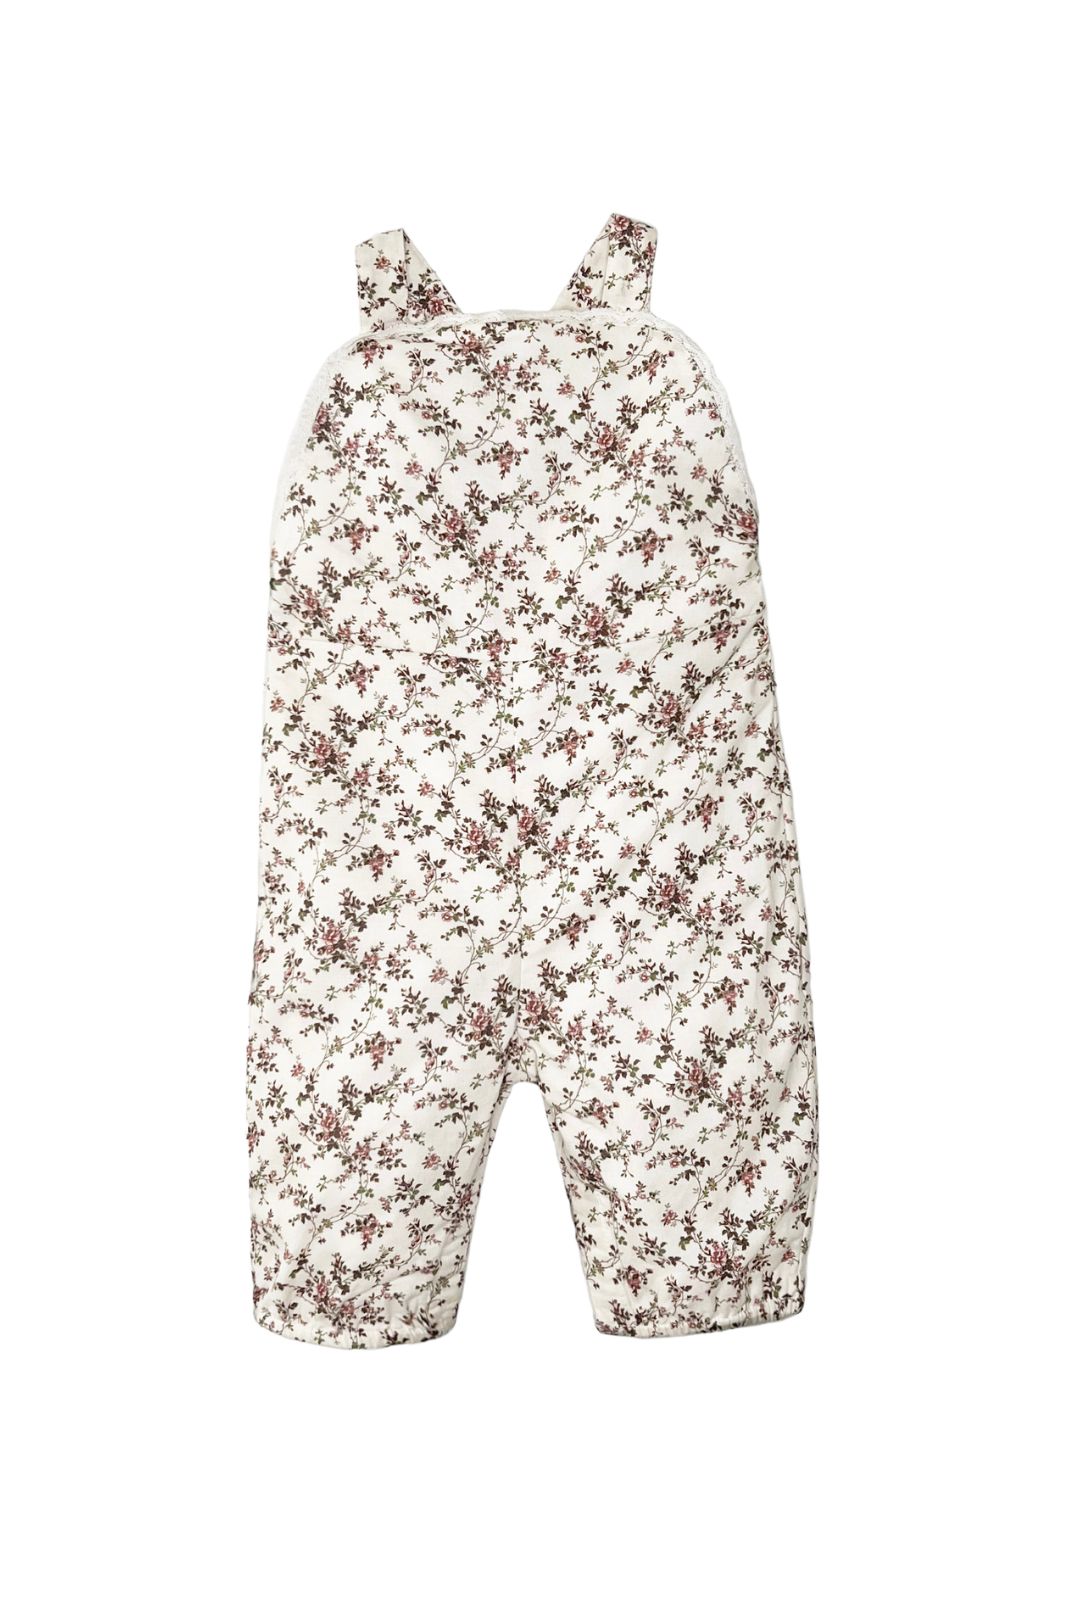 Product shot of the Shaw Playsuit in Overgrown Floral